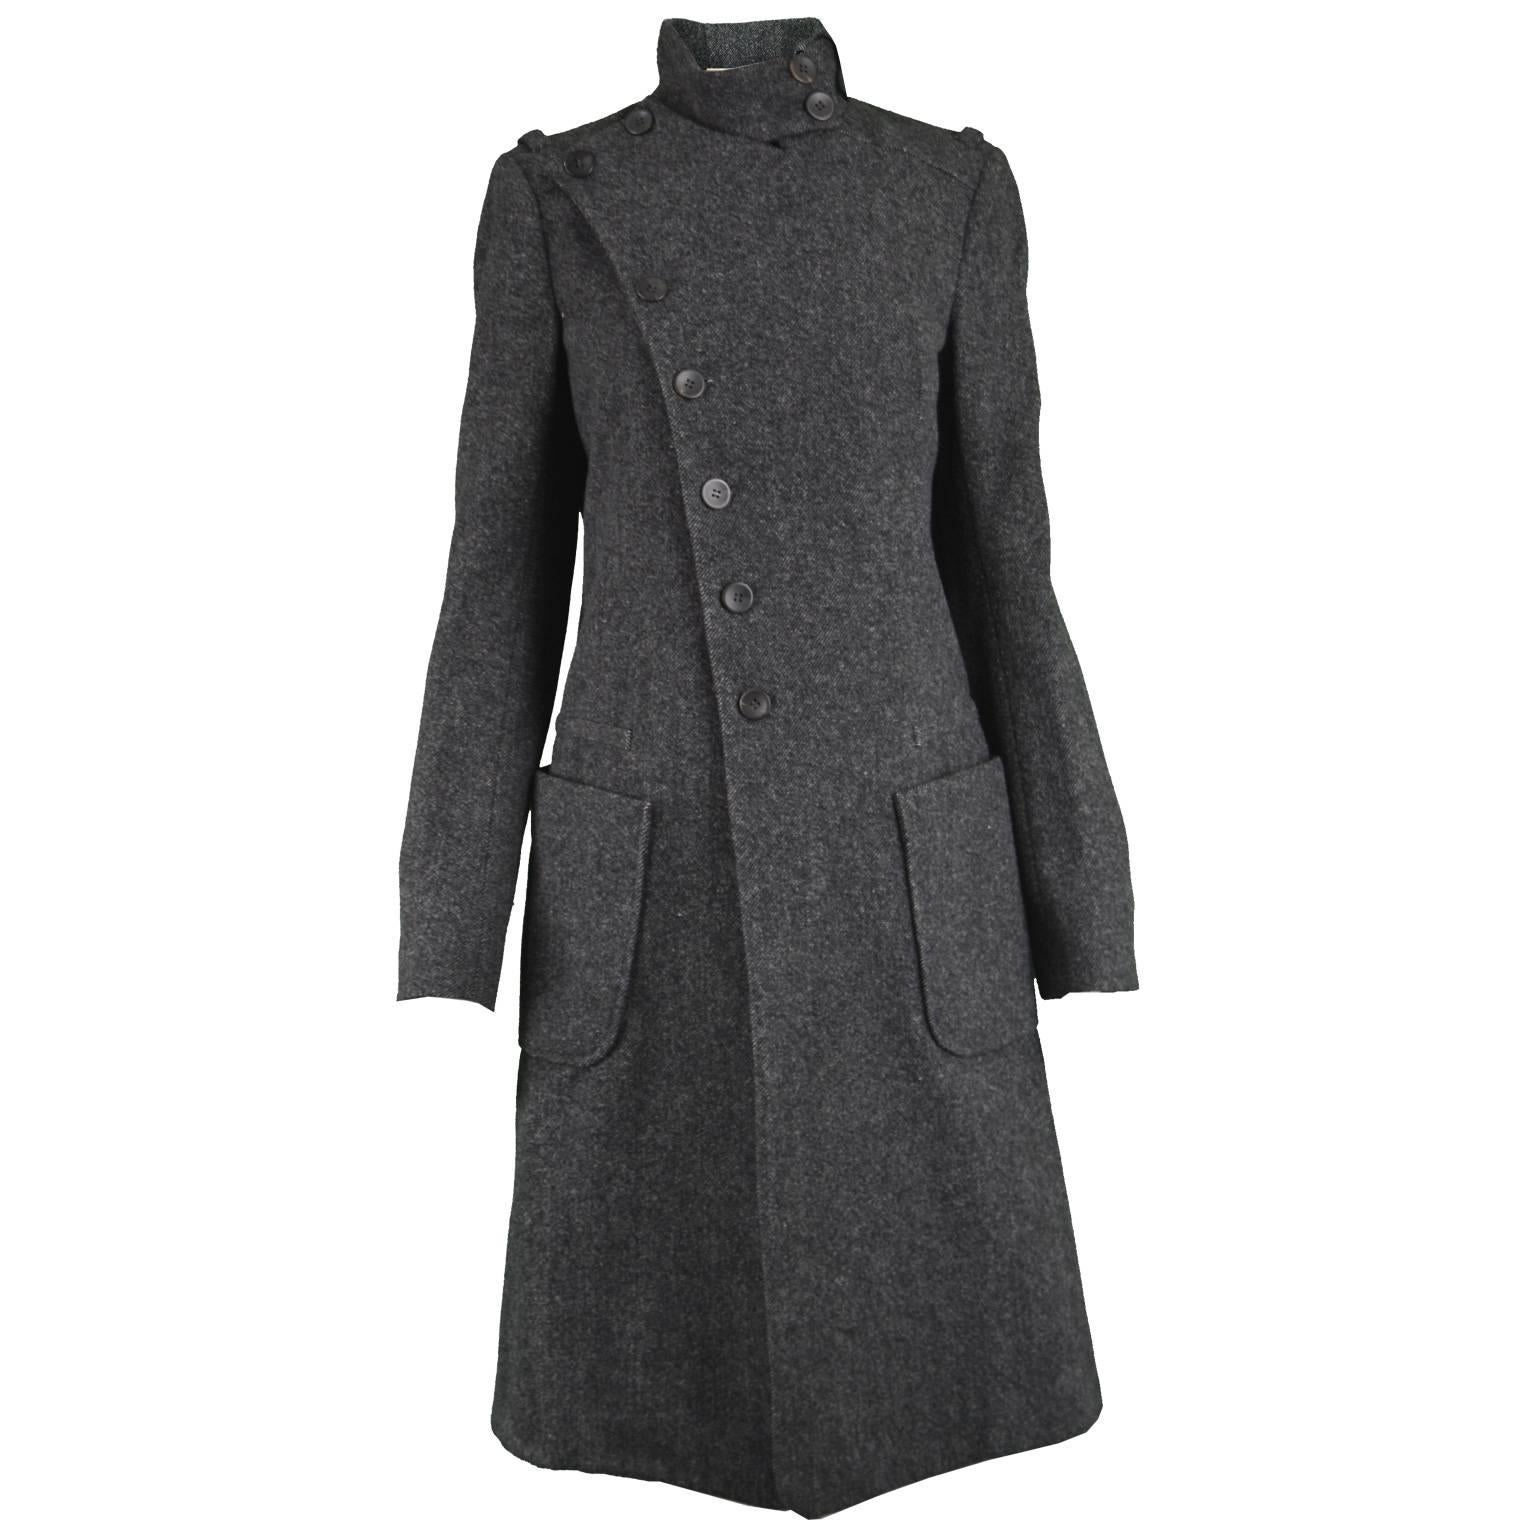 Balenciaga Nicolas Ghesquiere Gray Wool and Cashmere Military Style Coat, 2005